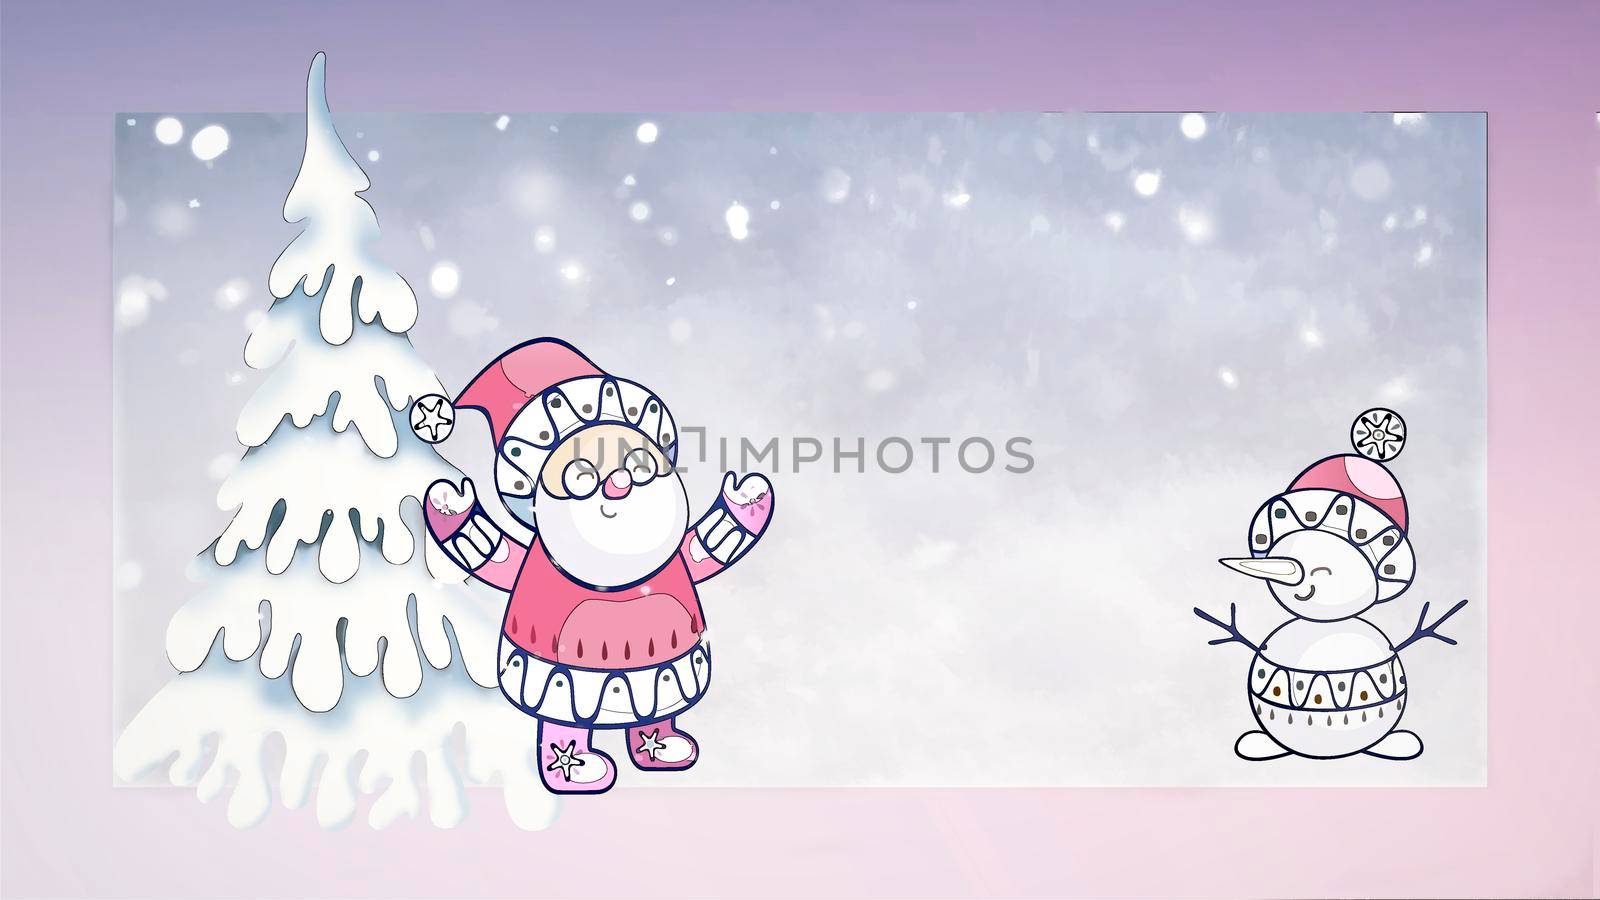 Beautiful Christmas card in vintage style with the image of a snowman and Santa Claus.